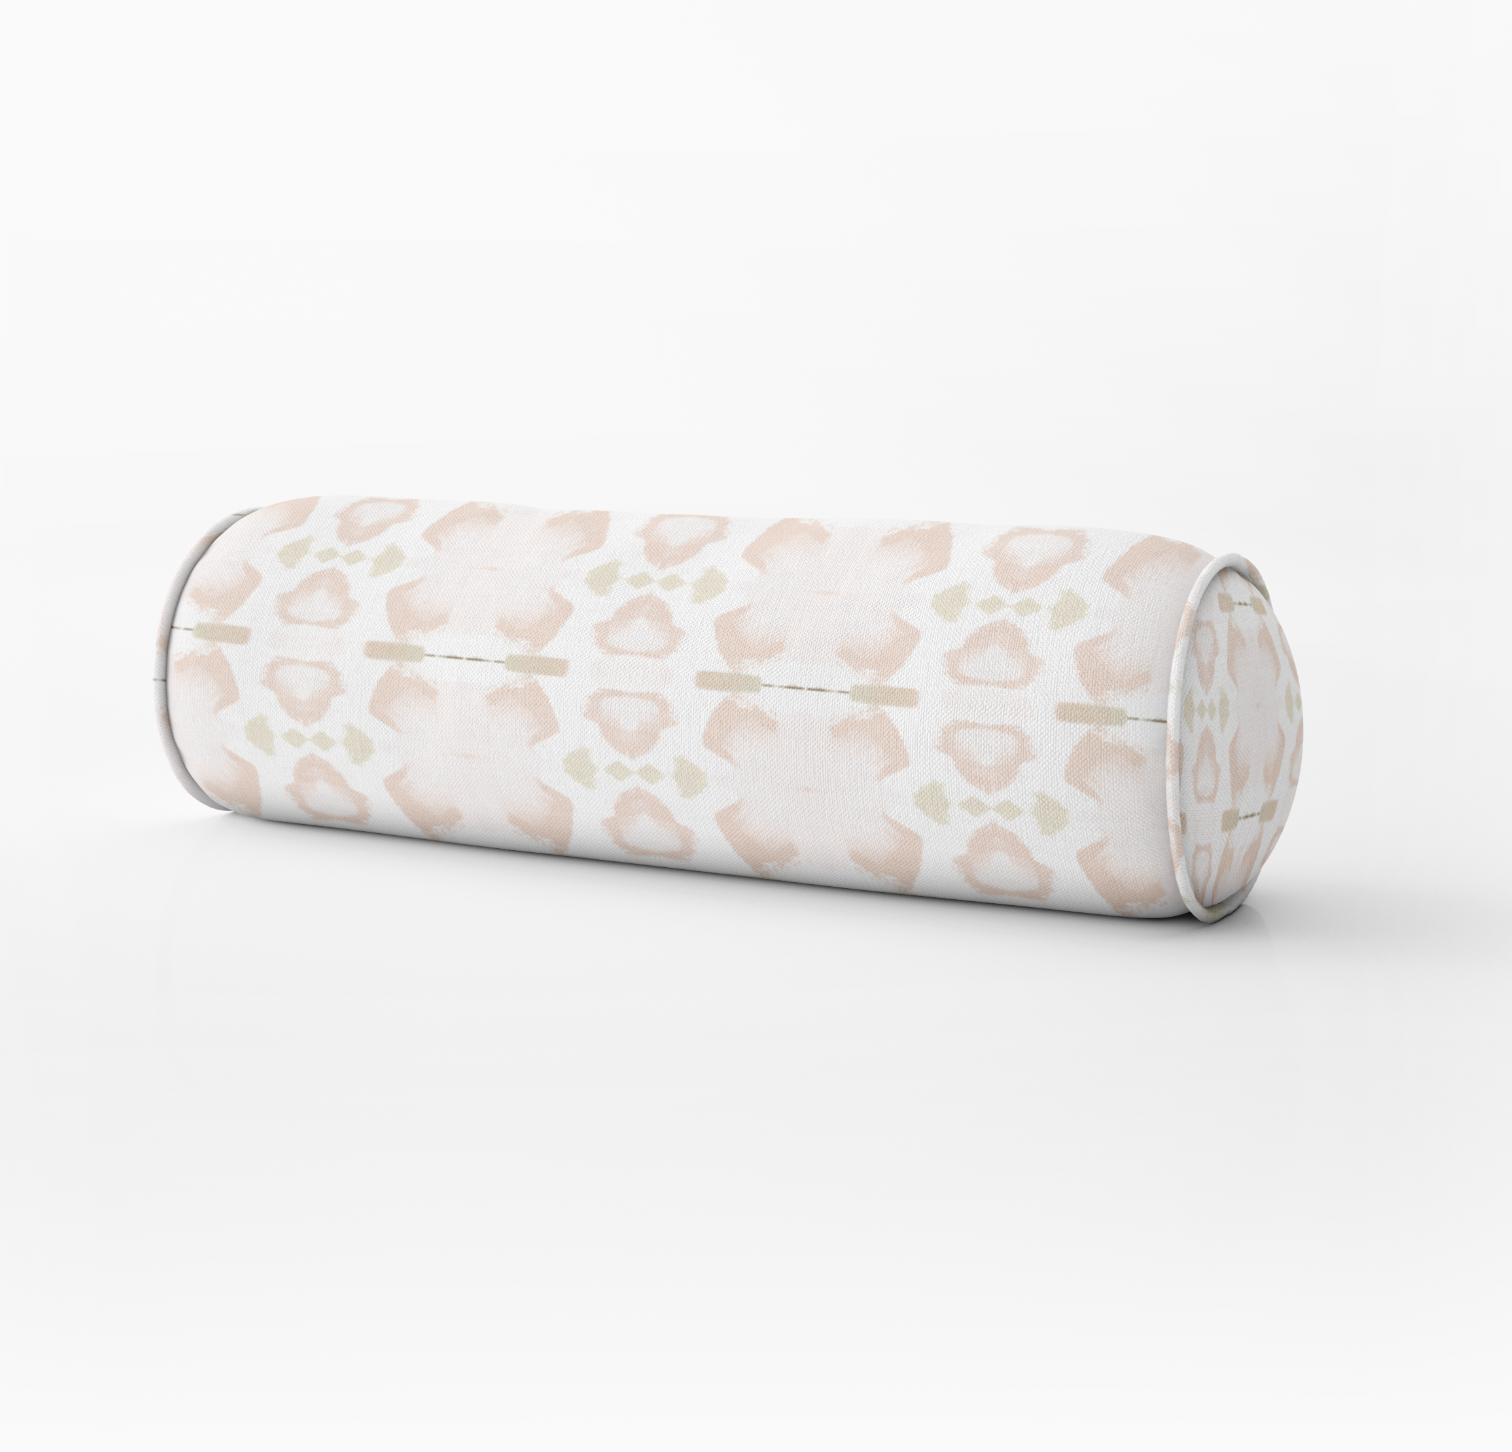 Large Bed Bolster Pillow 